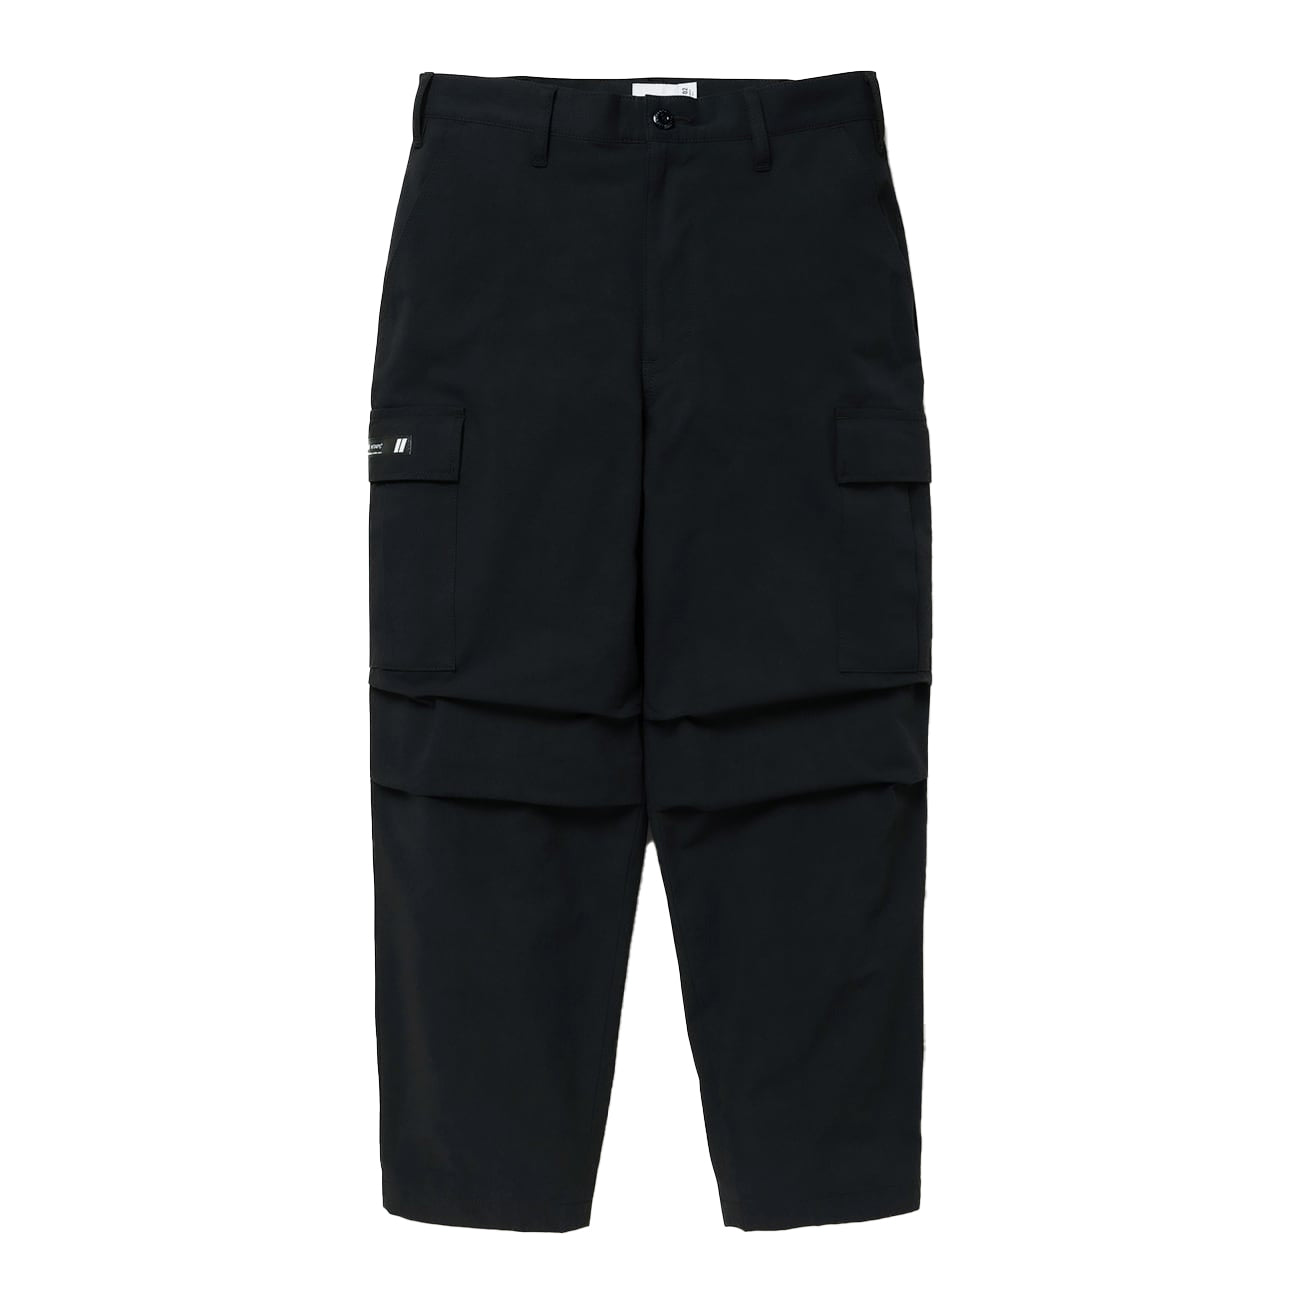 MILT9601 / Trousers / Nyco. Ripstop – INVINCIBLE Indonesia